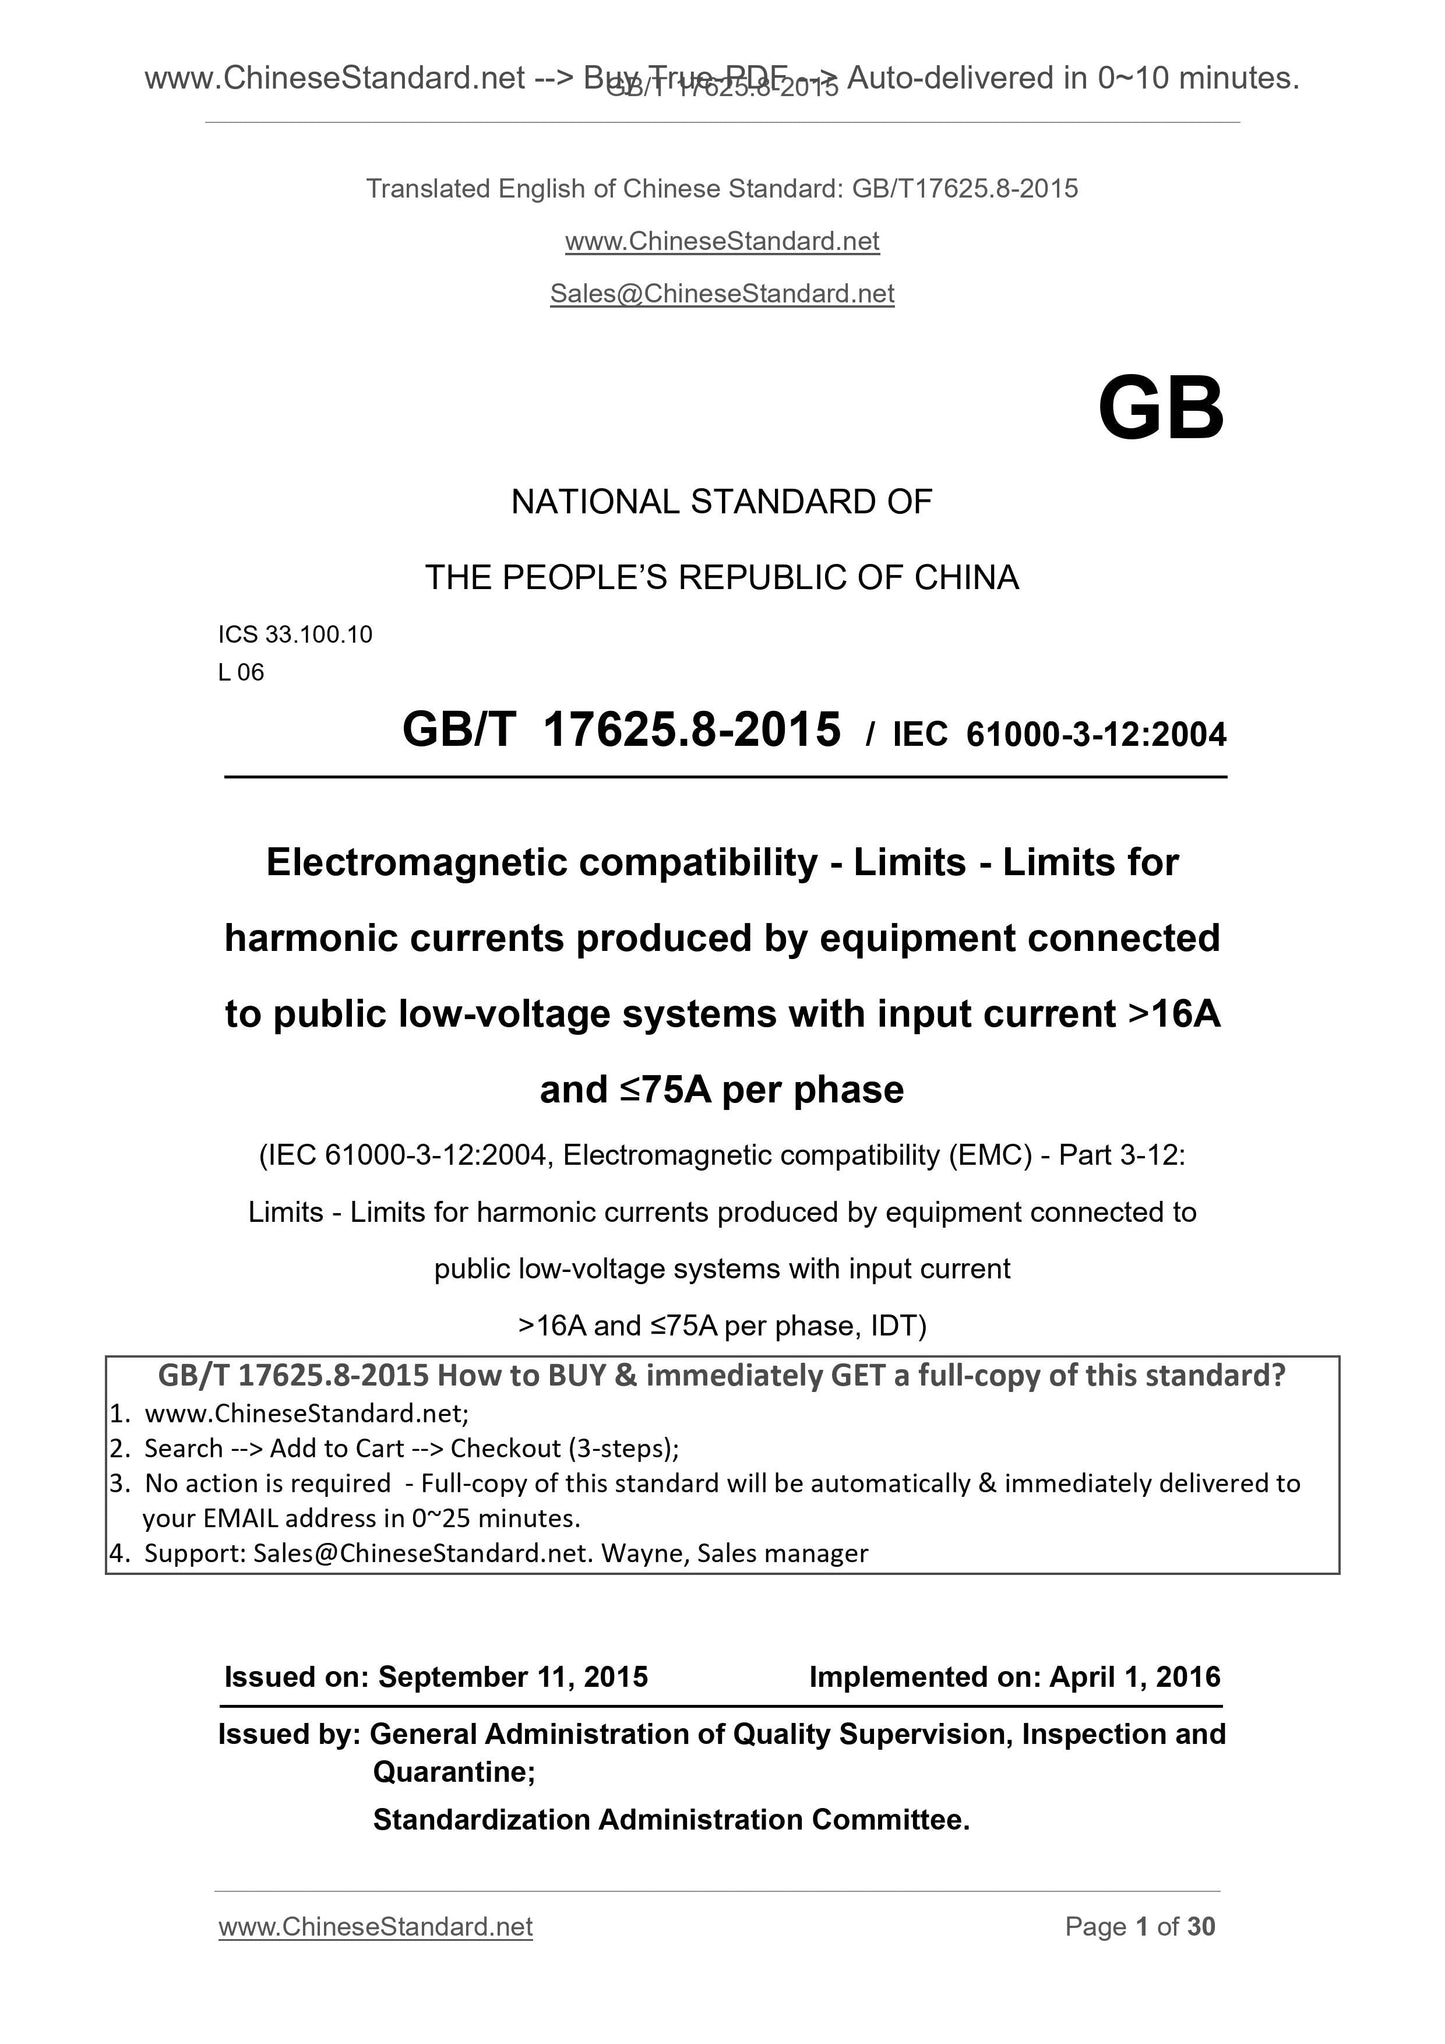 GB/T 17625.8-2015 Page 1